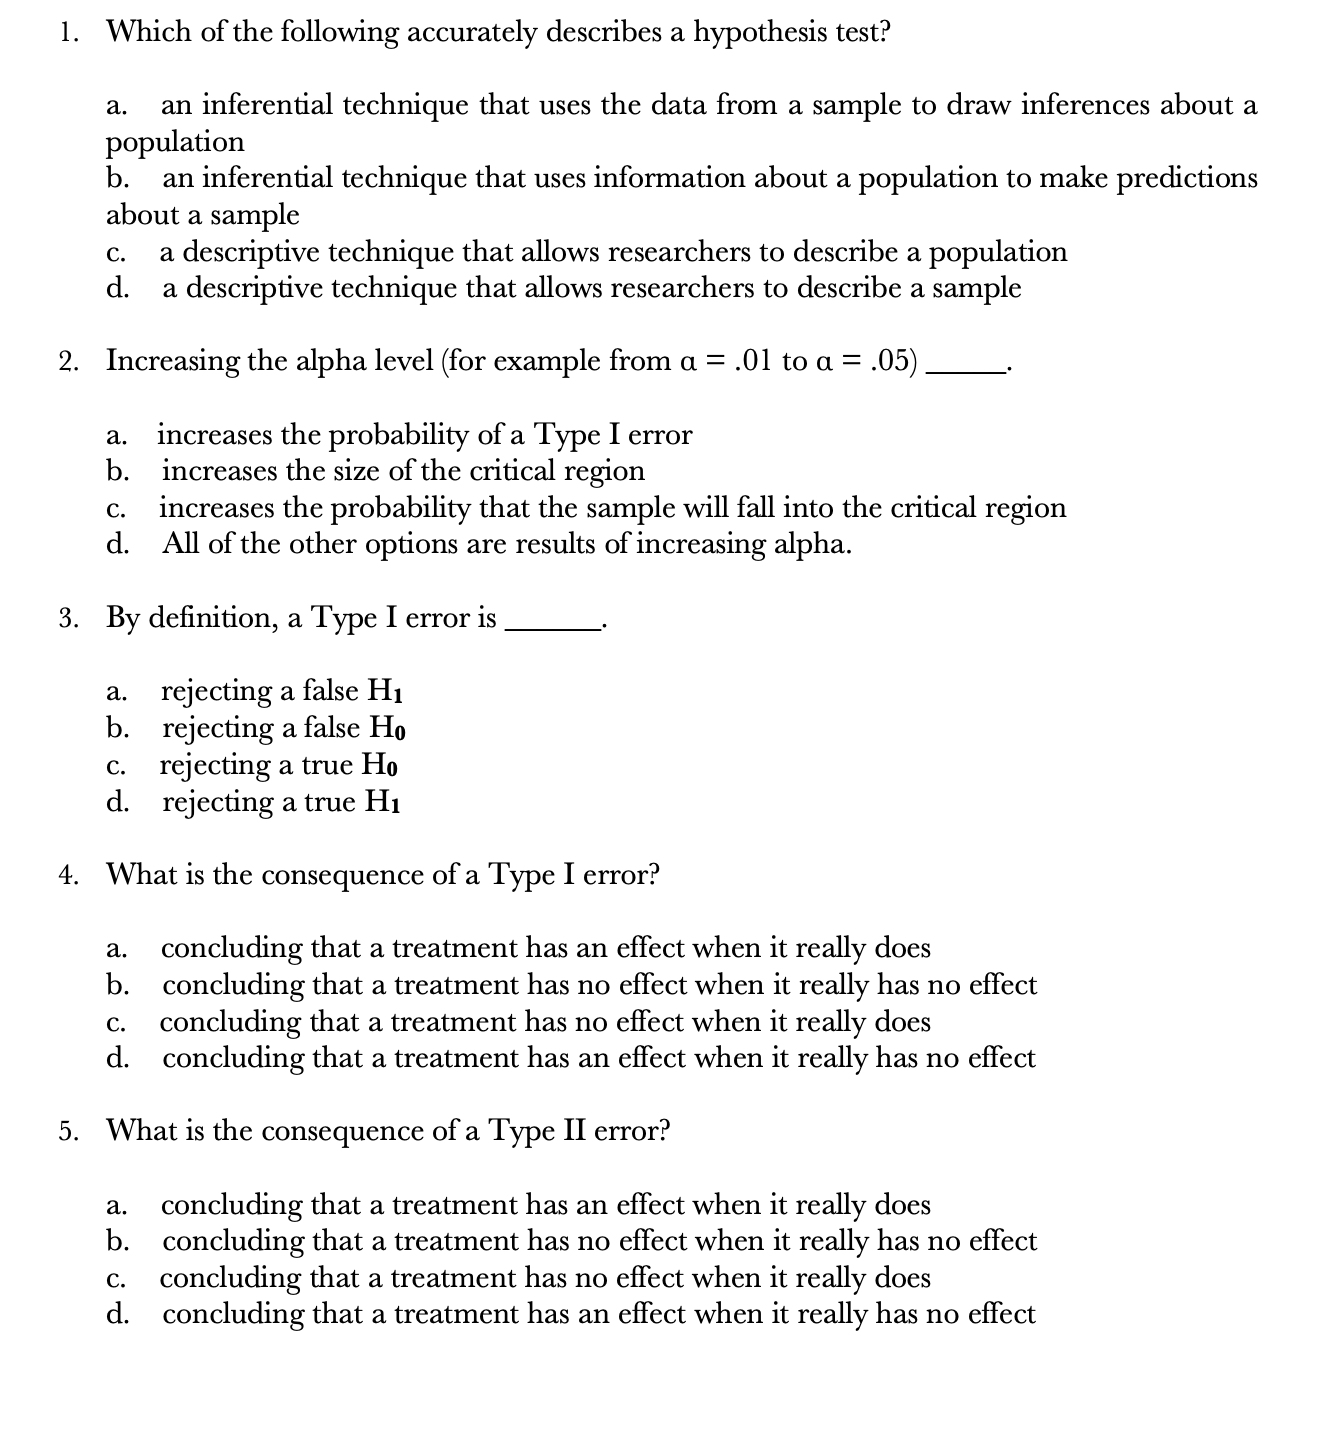 1. Which of the following accurately describes a hypothesis test?
an inferential technique that uses the data from a sample to draw inferences about a
population
b.
a.
an inferential technique that uses information about a population to make predictions
about a sample
a descriptive technique that allows researchers to describe a population
d.
C.
a descriptive technique that allows researchers to describe a sample
2. Increasing the alpha level (for example from a = .01 to a = .05).
increases the probability of a Type I error
b. increases the size of the critical region
increases the probability that the sample will fall into the critical region
d. All of the other options are results of increasing alpha.
a.
C.
3. By definition, a Type I error is
a. rejecting a false H1
b. rejecting a false Ho
c. rejecting a true Ho
d. rejecting a true H1
4. What is the consequence of a Type I error?
concluding that a treatment has an effect when it really does
b. concluding that a treatment has no effect when it really has no effect
c. concluding that a treatment has no effect when it really does
d. concluding that a treatment has an effect when it really has no effect
a.
5. What is the consequence of a Type II error?
concluding that a treatment has an effect when it really does
b. concluding that a treatment has no effect when it really has no effect
c. concluding that a treatment has no effect when it really does
d. concluding that a treatment has an effect when it really has no effect
a.
